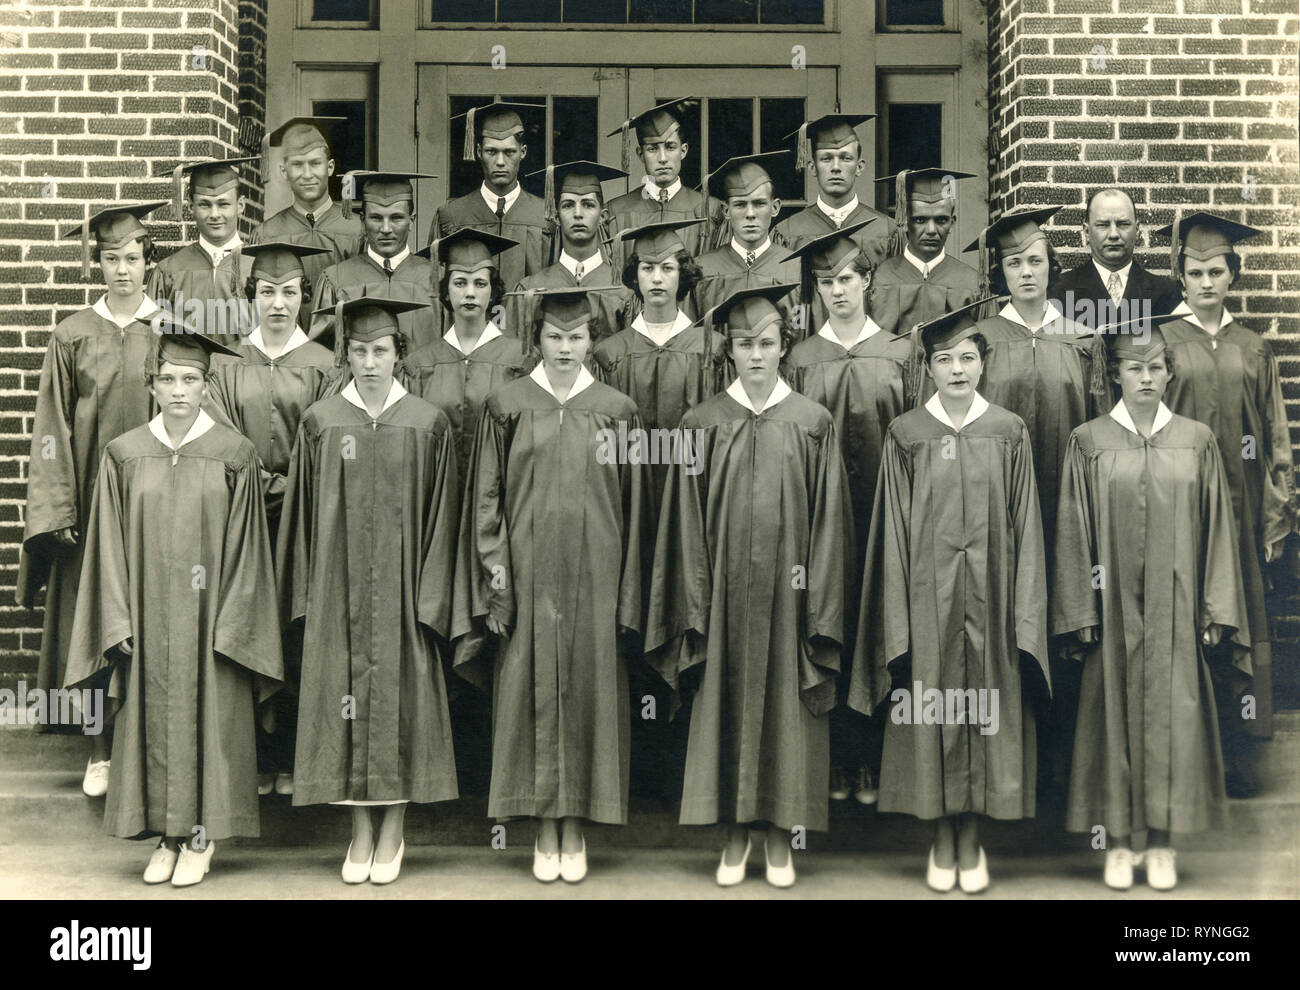 Horizontal shot of a High School graduating class of 1935ish from a small town in Arkansas. Stock Photo